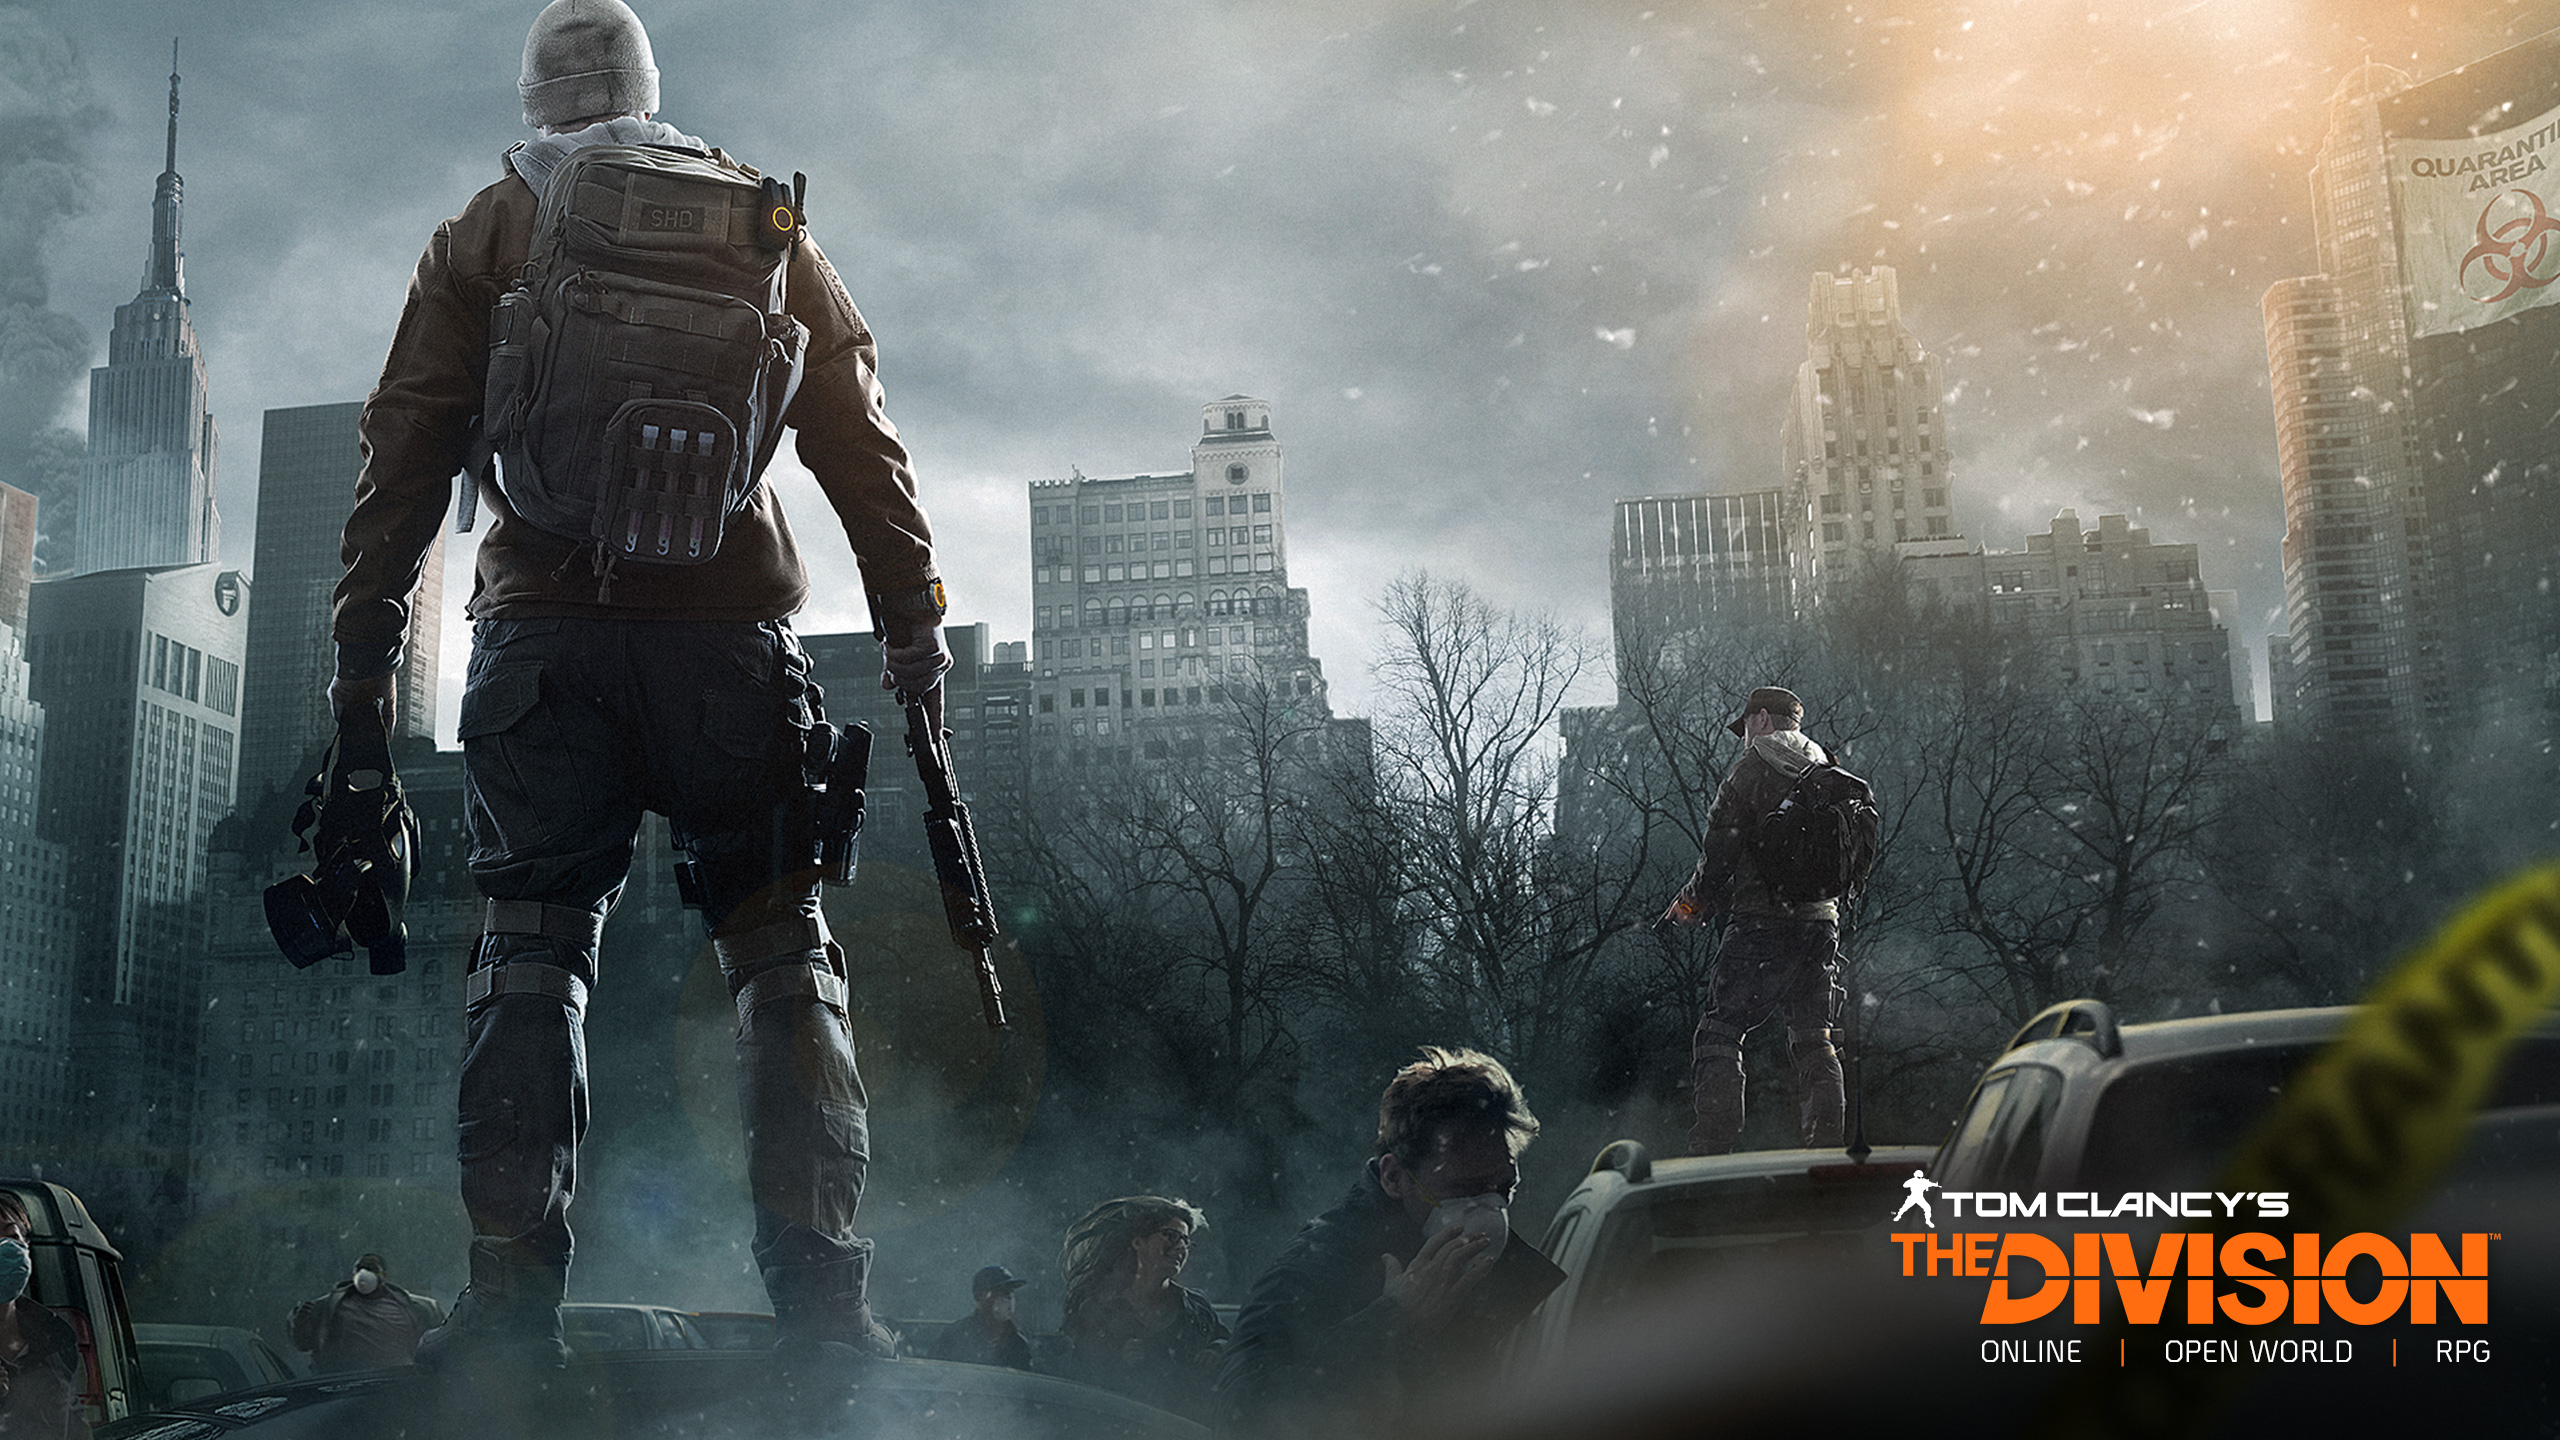 Free download Tom Clancys The Division Game Wallpaper HD Wallpaper [2560x1440] for your Desktop, Mobile & Tablet. Explore The Game Wallpaper. Video Game Wallpaper, The Game Rapper Wallpaper, Free Game Wallpaper